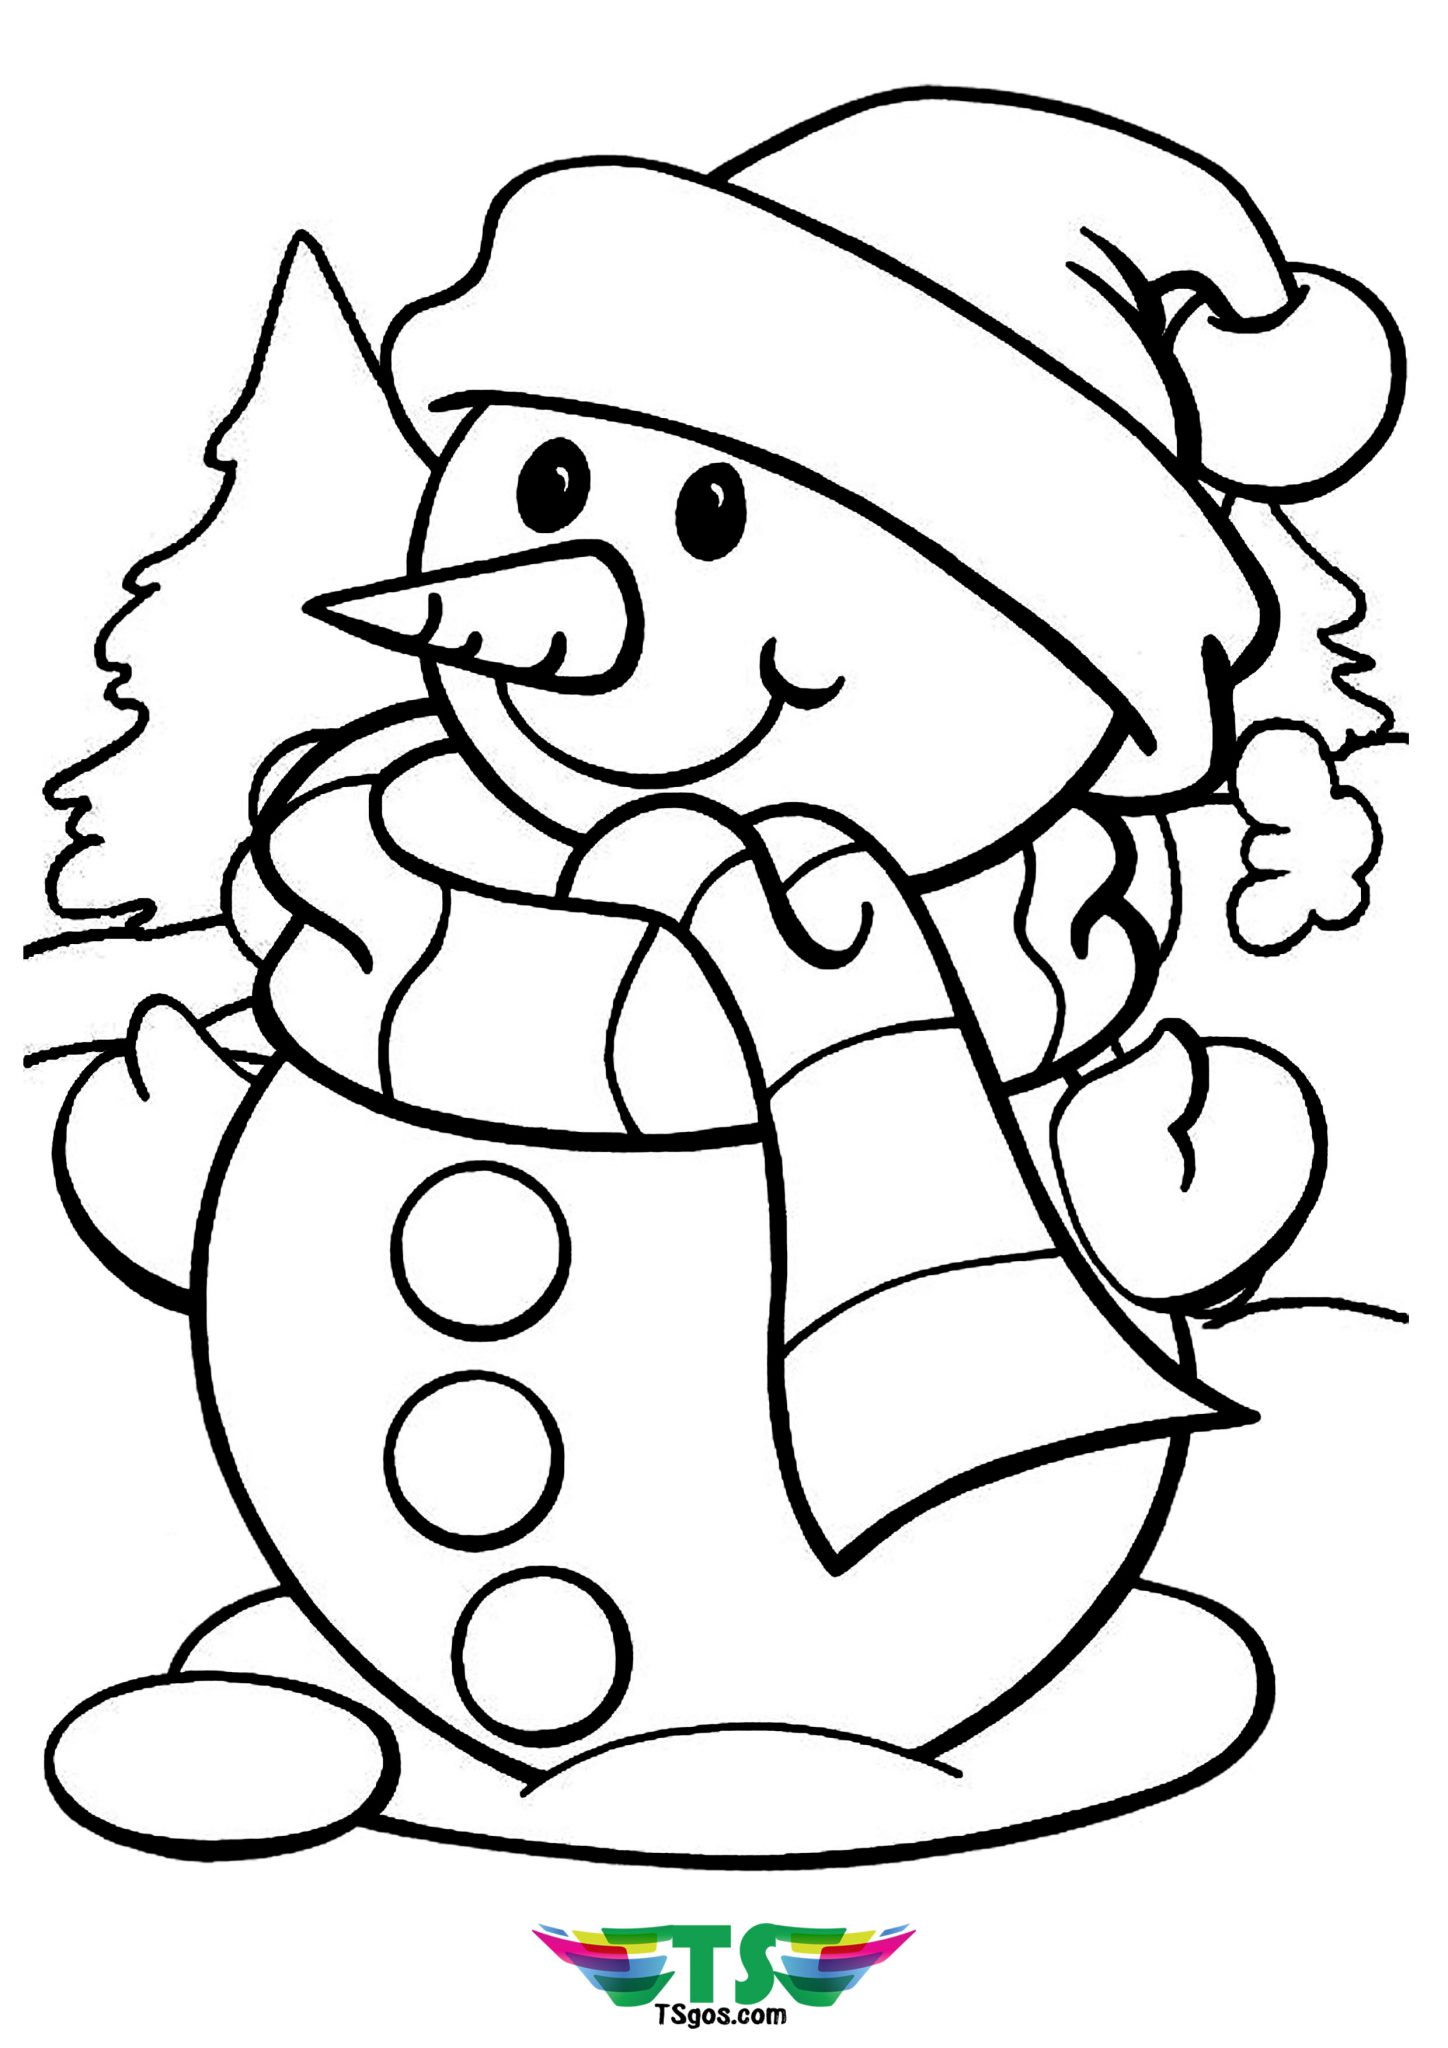 Winter Coloring Page For Kids - TSgos.com